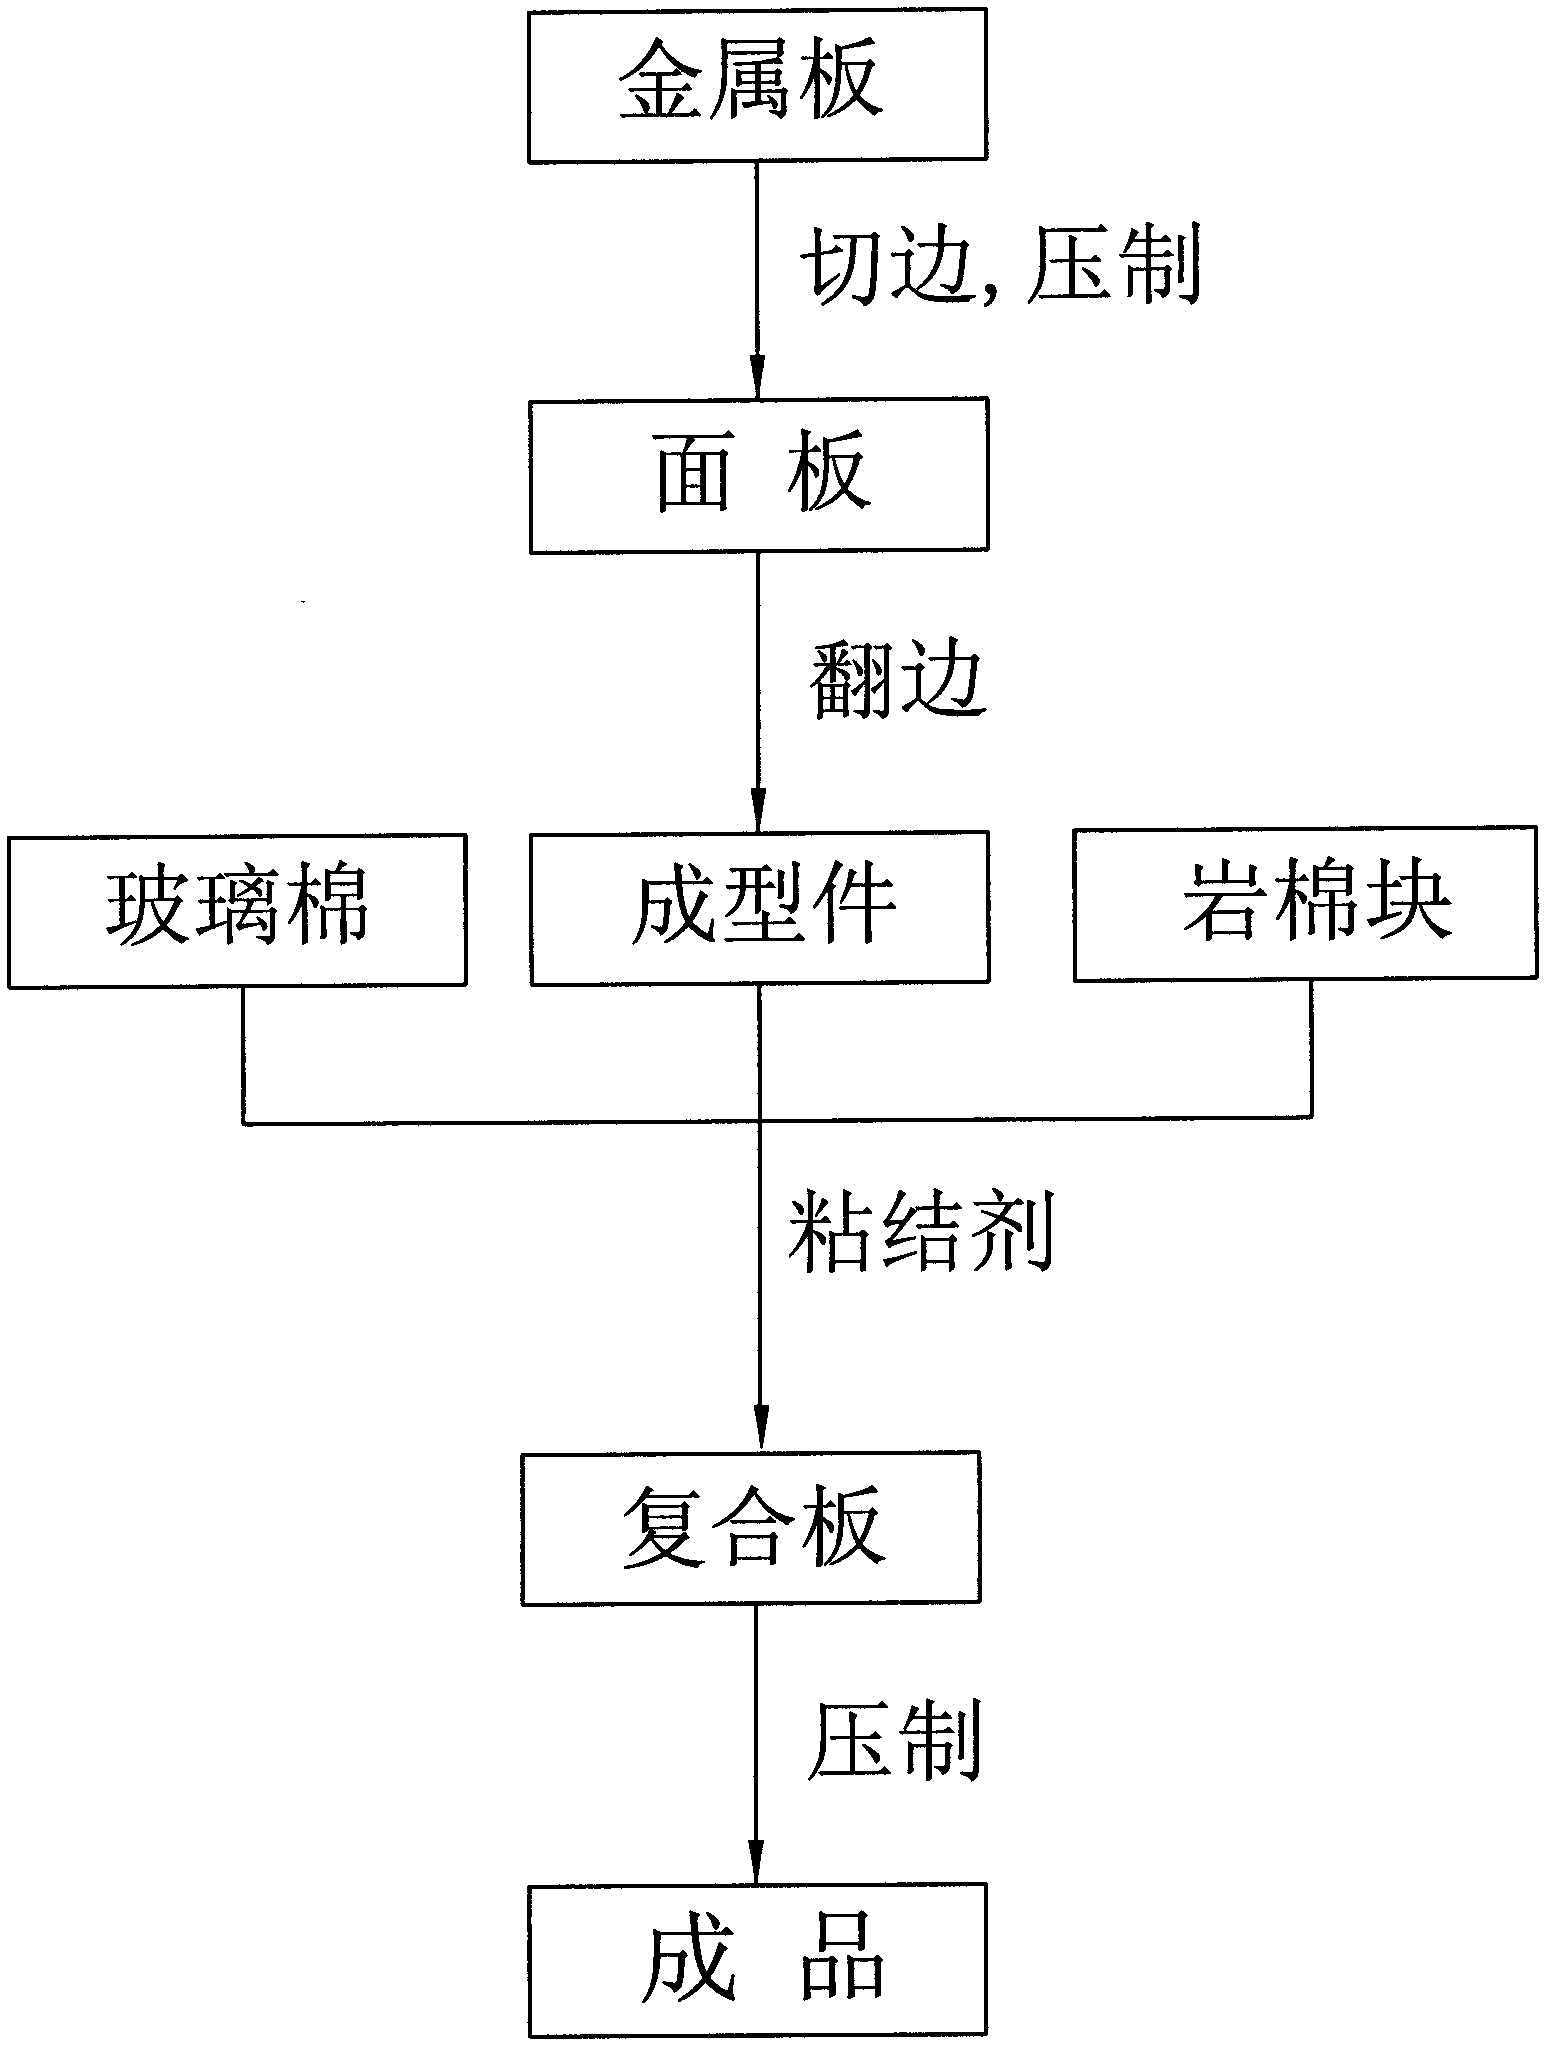 Method for manufacturing ceiling